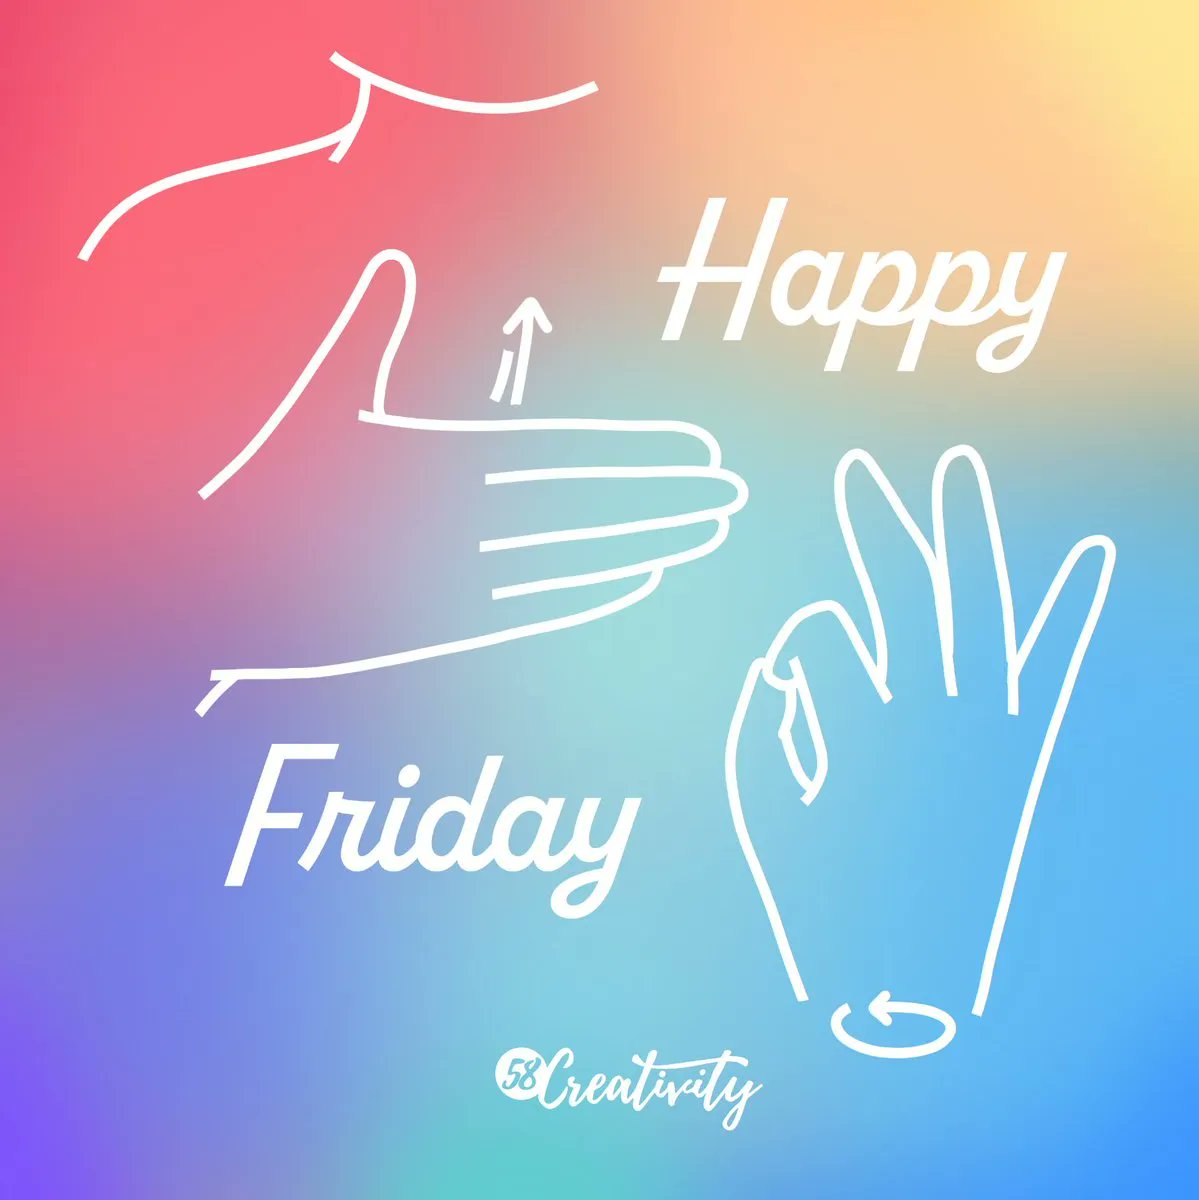 It's Friday! Hope you have a wonderful weekend!

#asl #americansignlanguage #deafcommunity #InclusionMatters